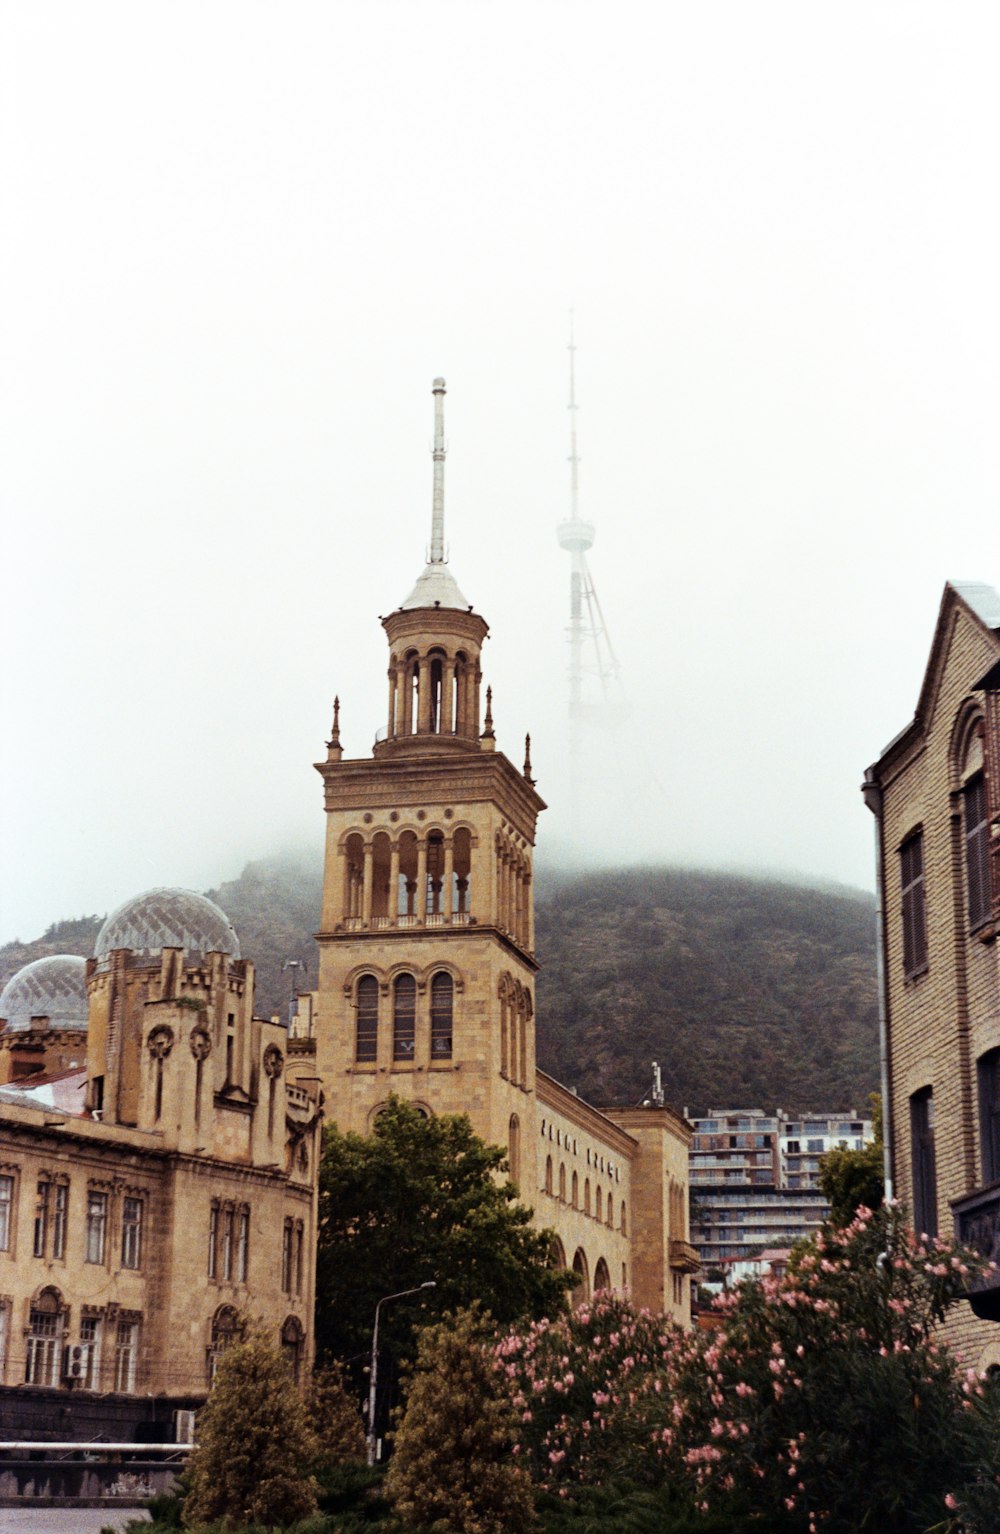 a tall building with a clock tower on top of it